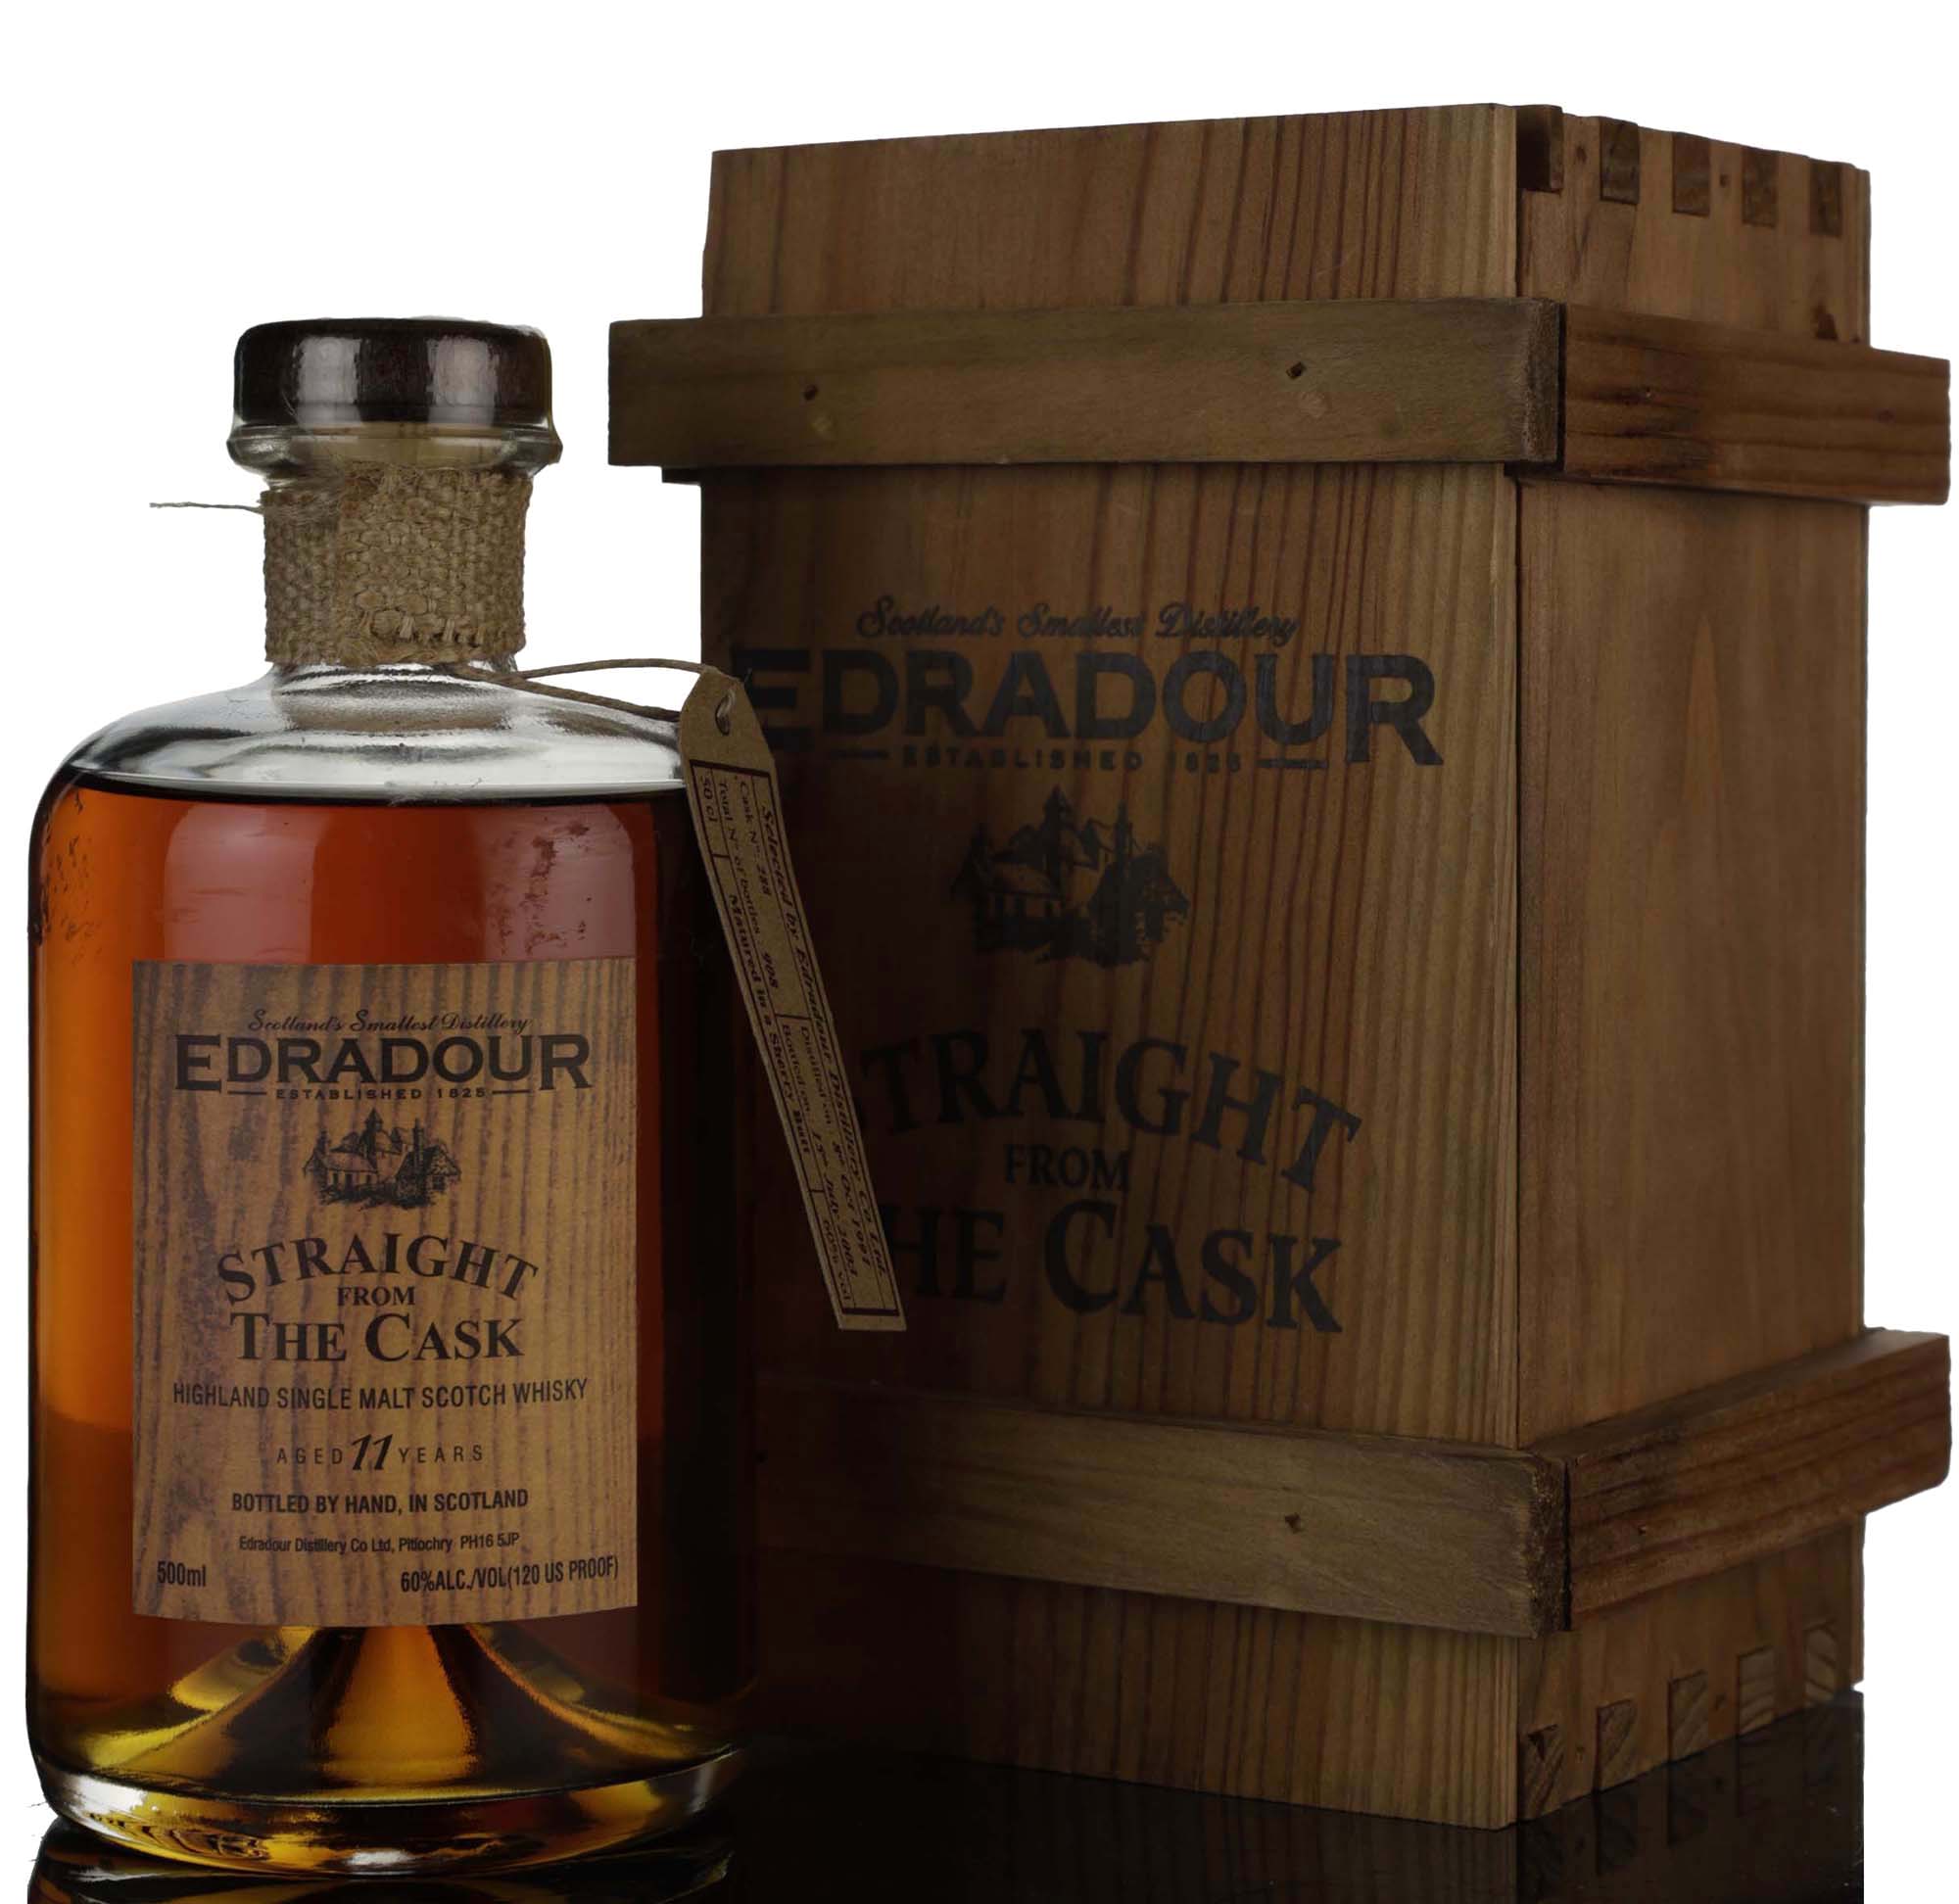 Edradour 1991-2003 - 11 Year Old - Straight From The Cask - Single Cask 288